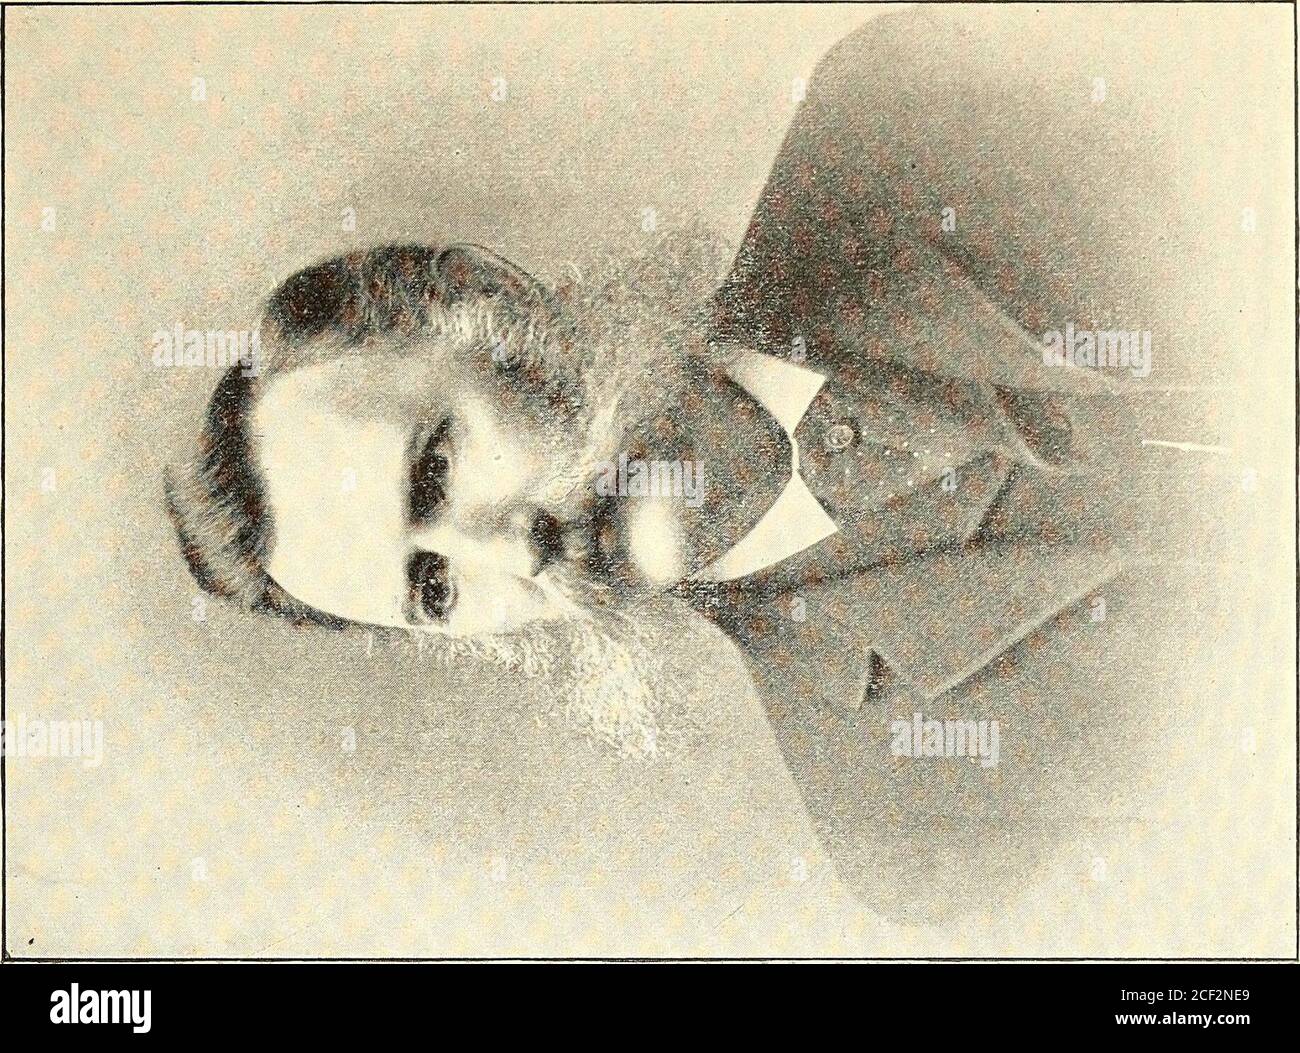 . The Lincoln autographic album : embracing likewise the favorite poetry of Abraham Lincoln. 2 J O u 35E- 5u O tu35E- Z O uj o. J/3 wo on t/3 W 2;o ouz 35H 5u u tu35H Z o UJ u  Stock Photo